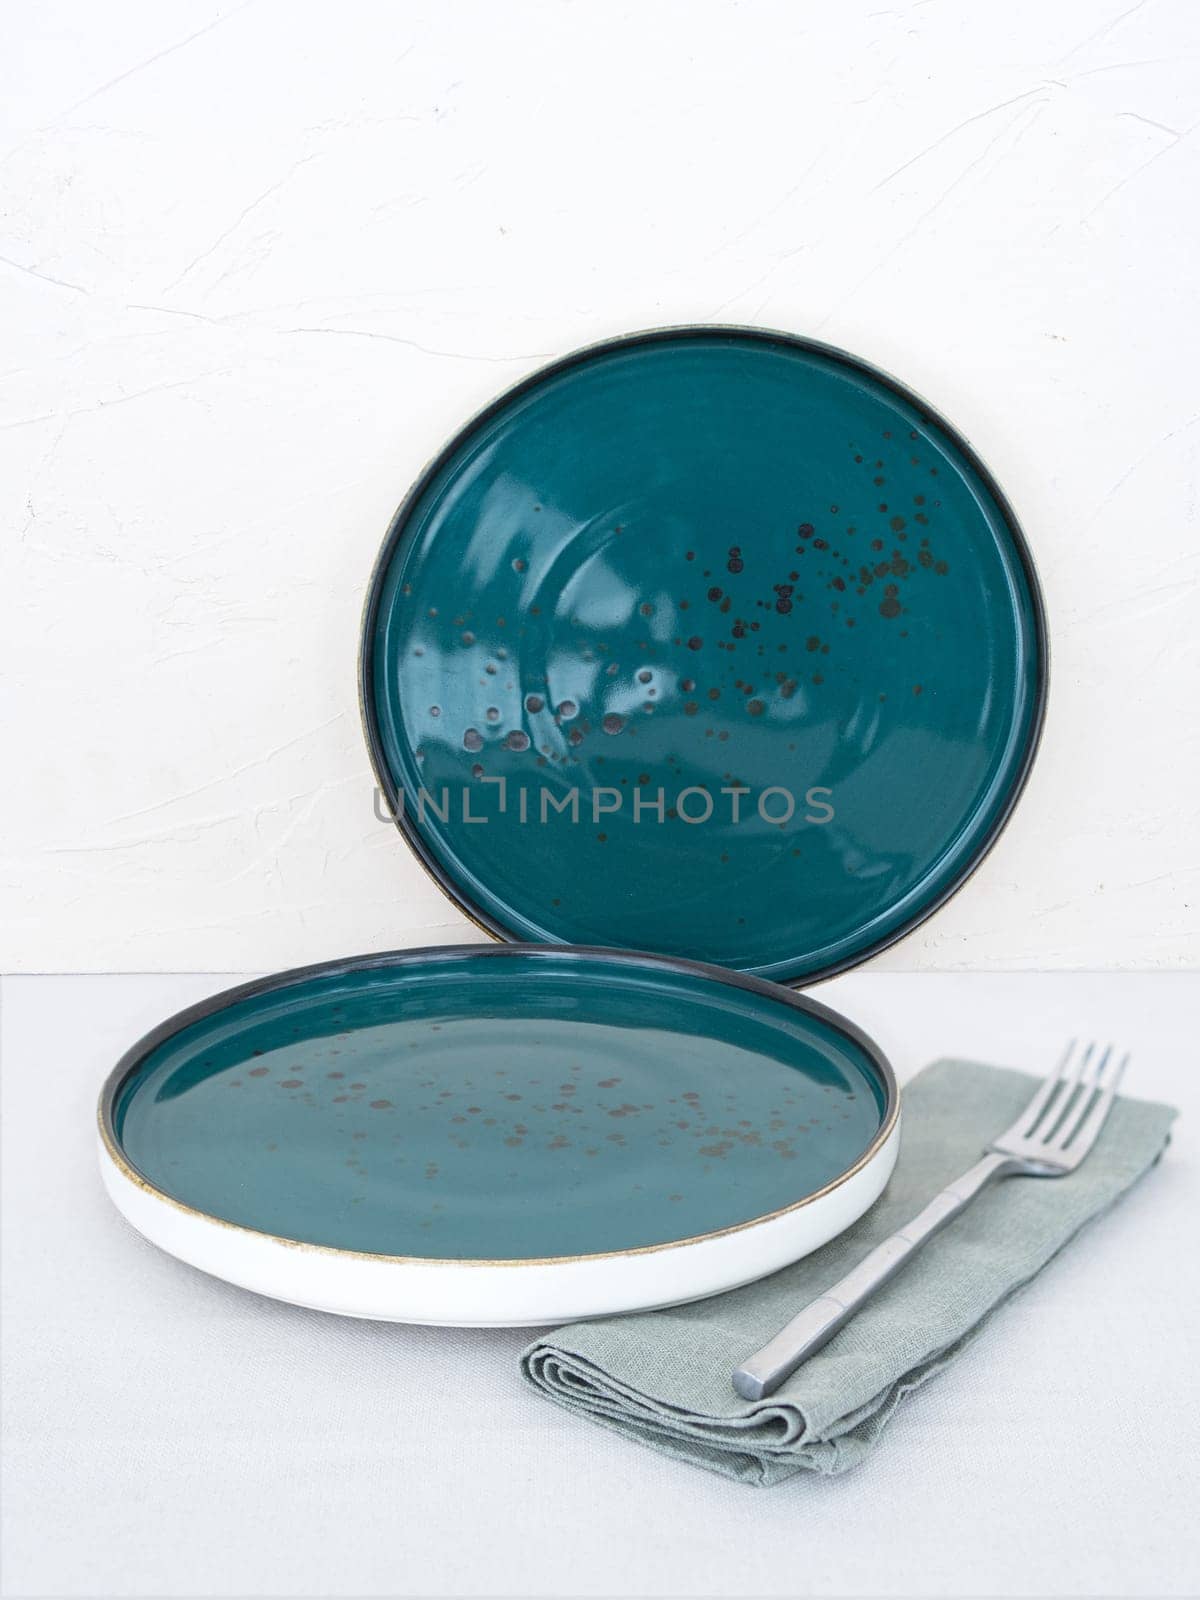 Two empty blue dinner plates with tablecloth on table with white background by dmitryz